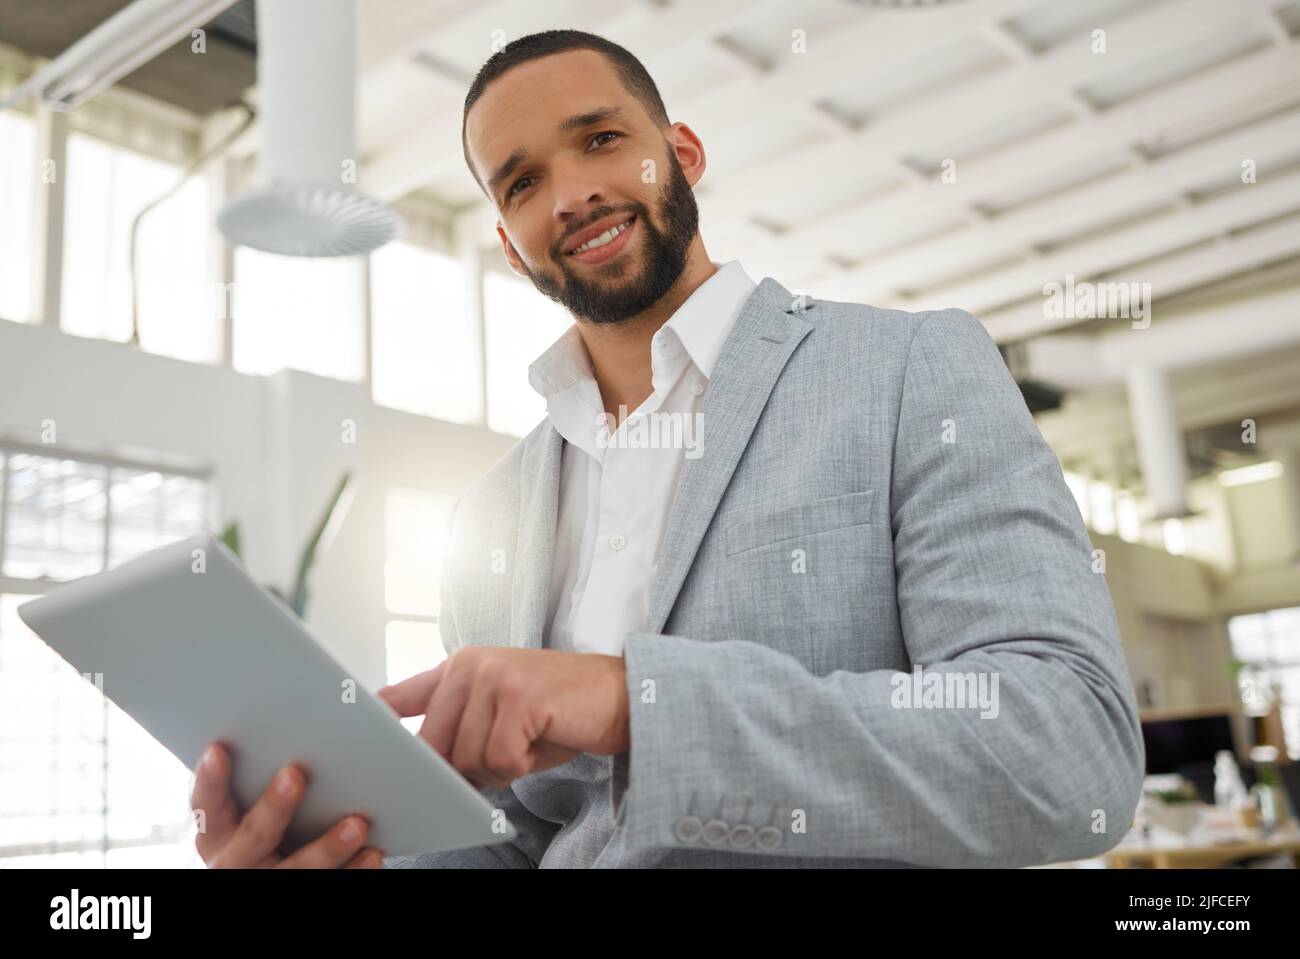 Portrait of a young happy mixed race businessman working on a digital tablet in an office. One hispanic male boss smiling and holding a digital tablet Stock Photo